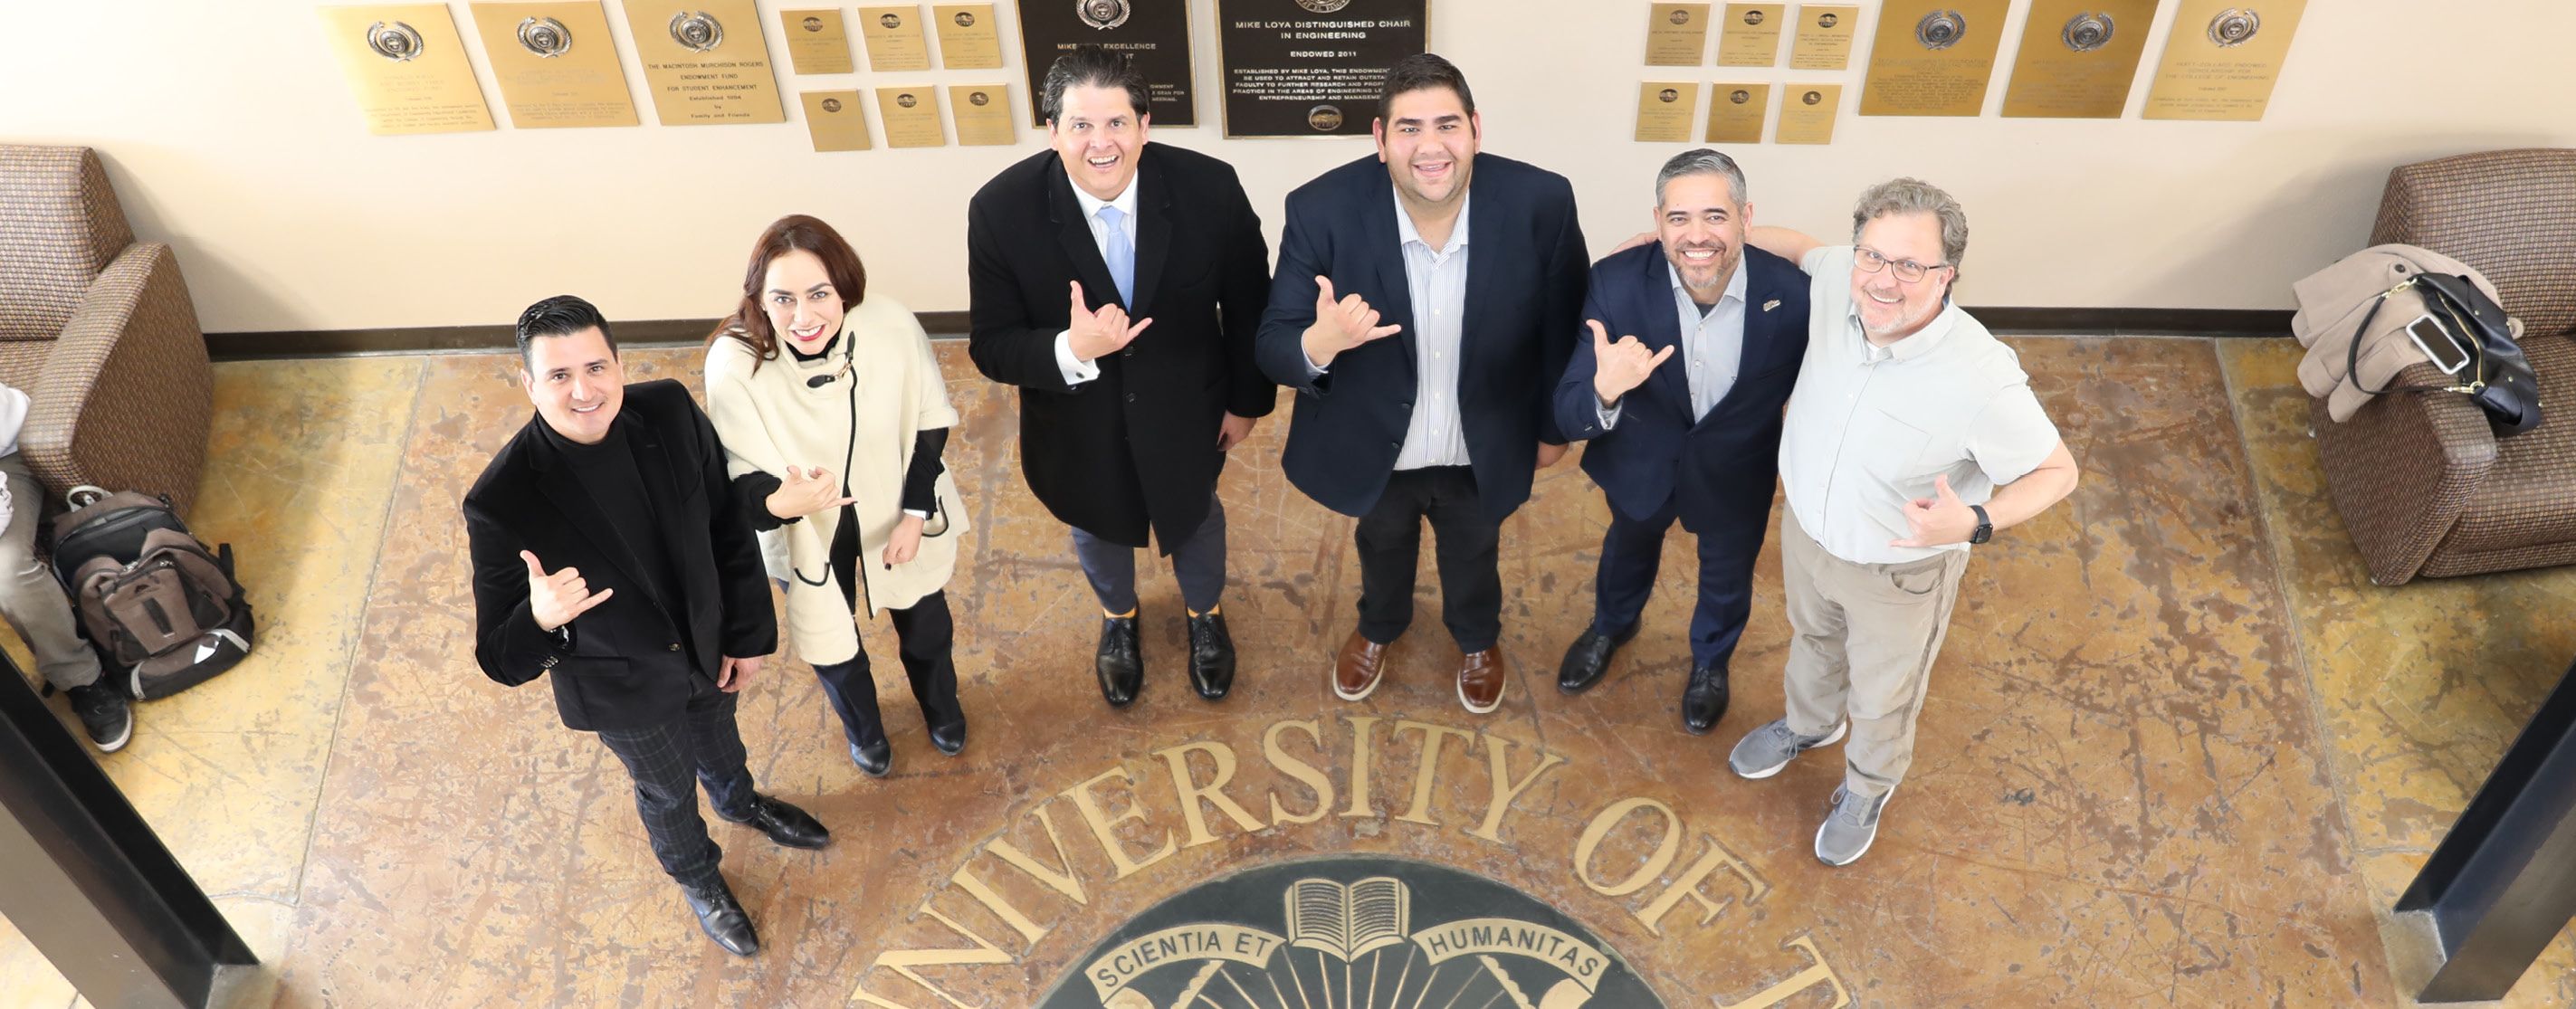 UTEP and UTCam Partner to Boost Academic Collaboration and Exchange Programs 